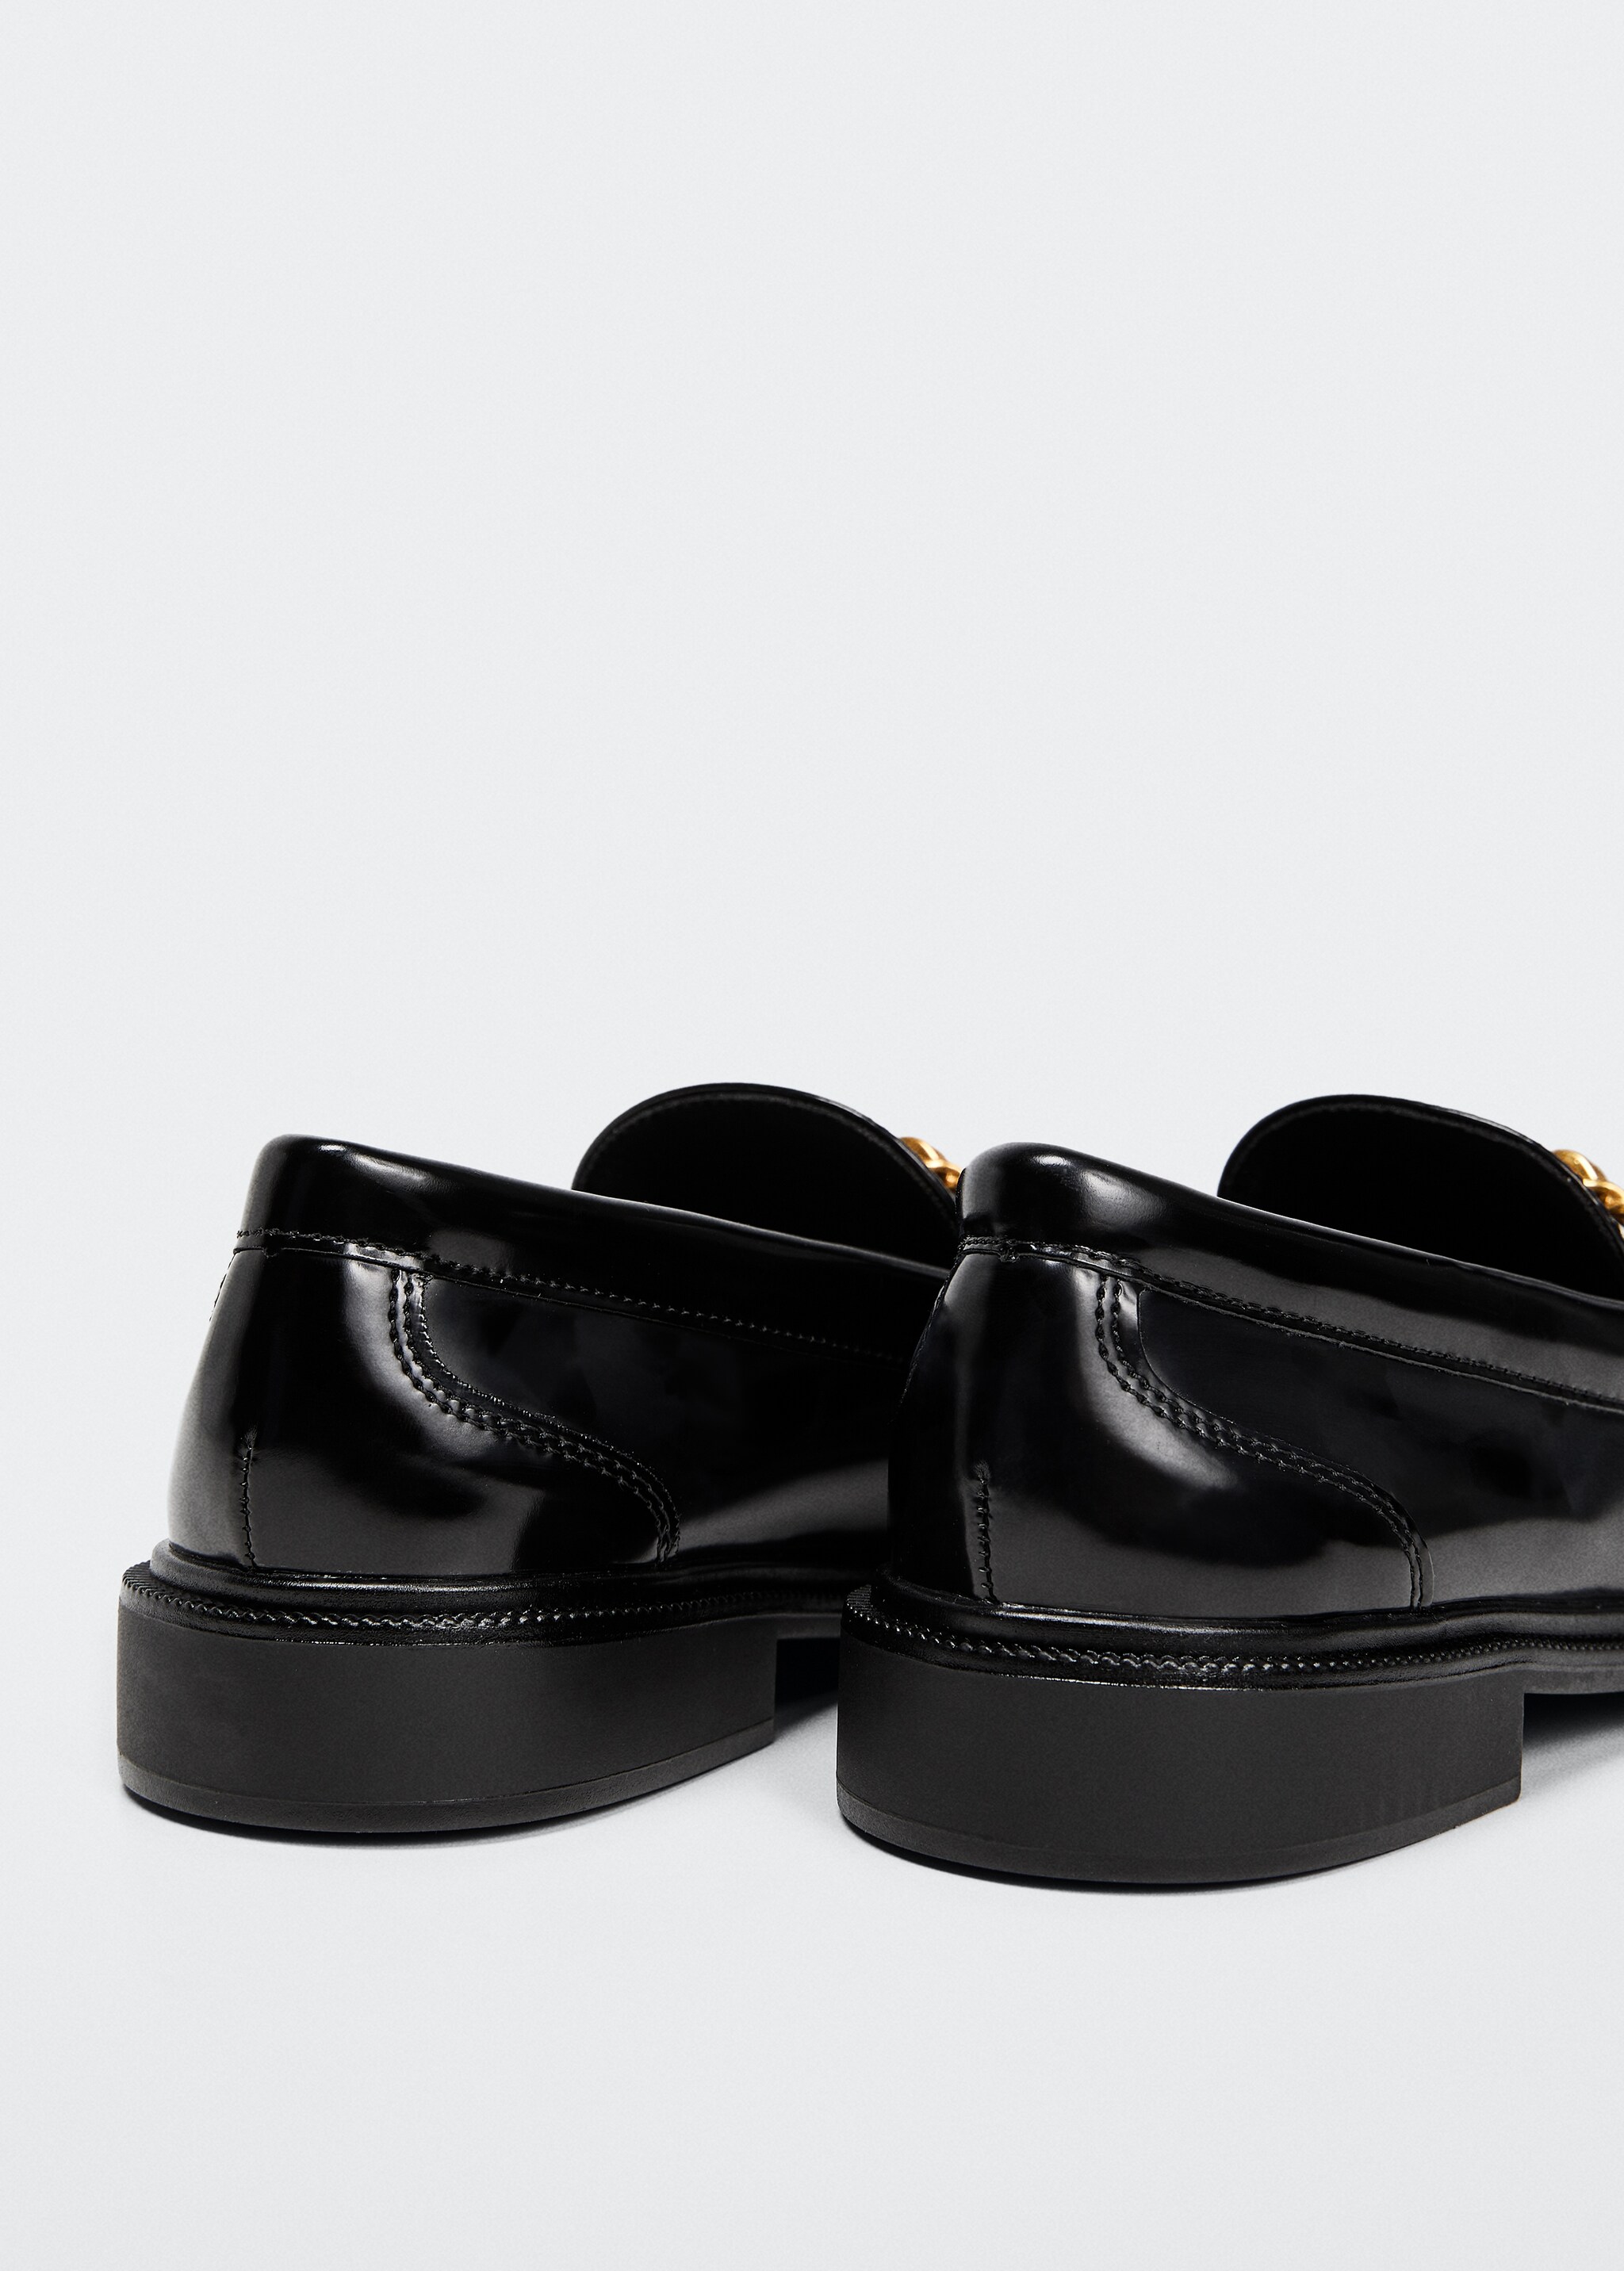 Chain loafers - Details of the article 1